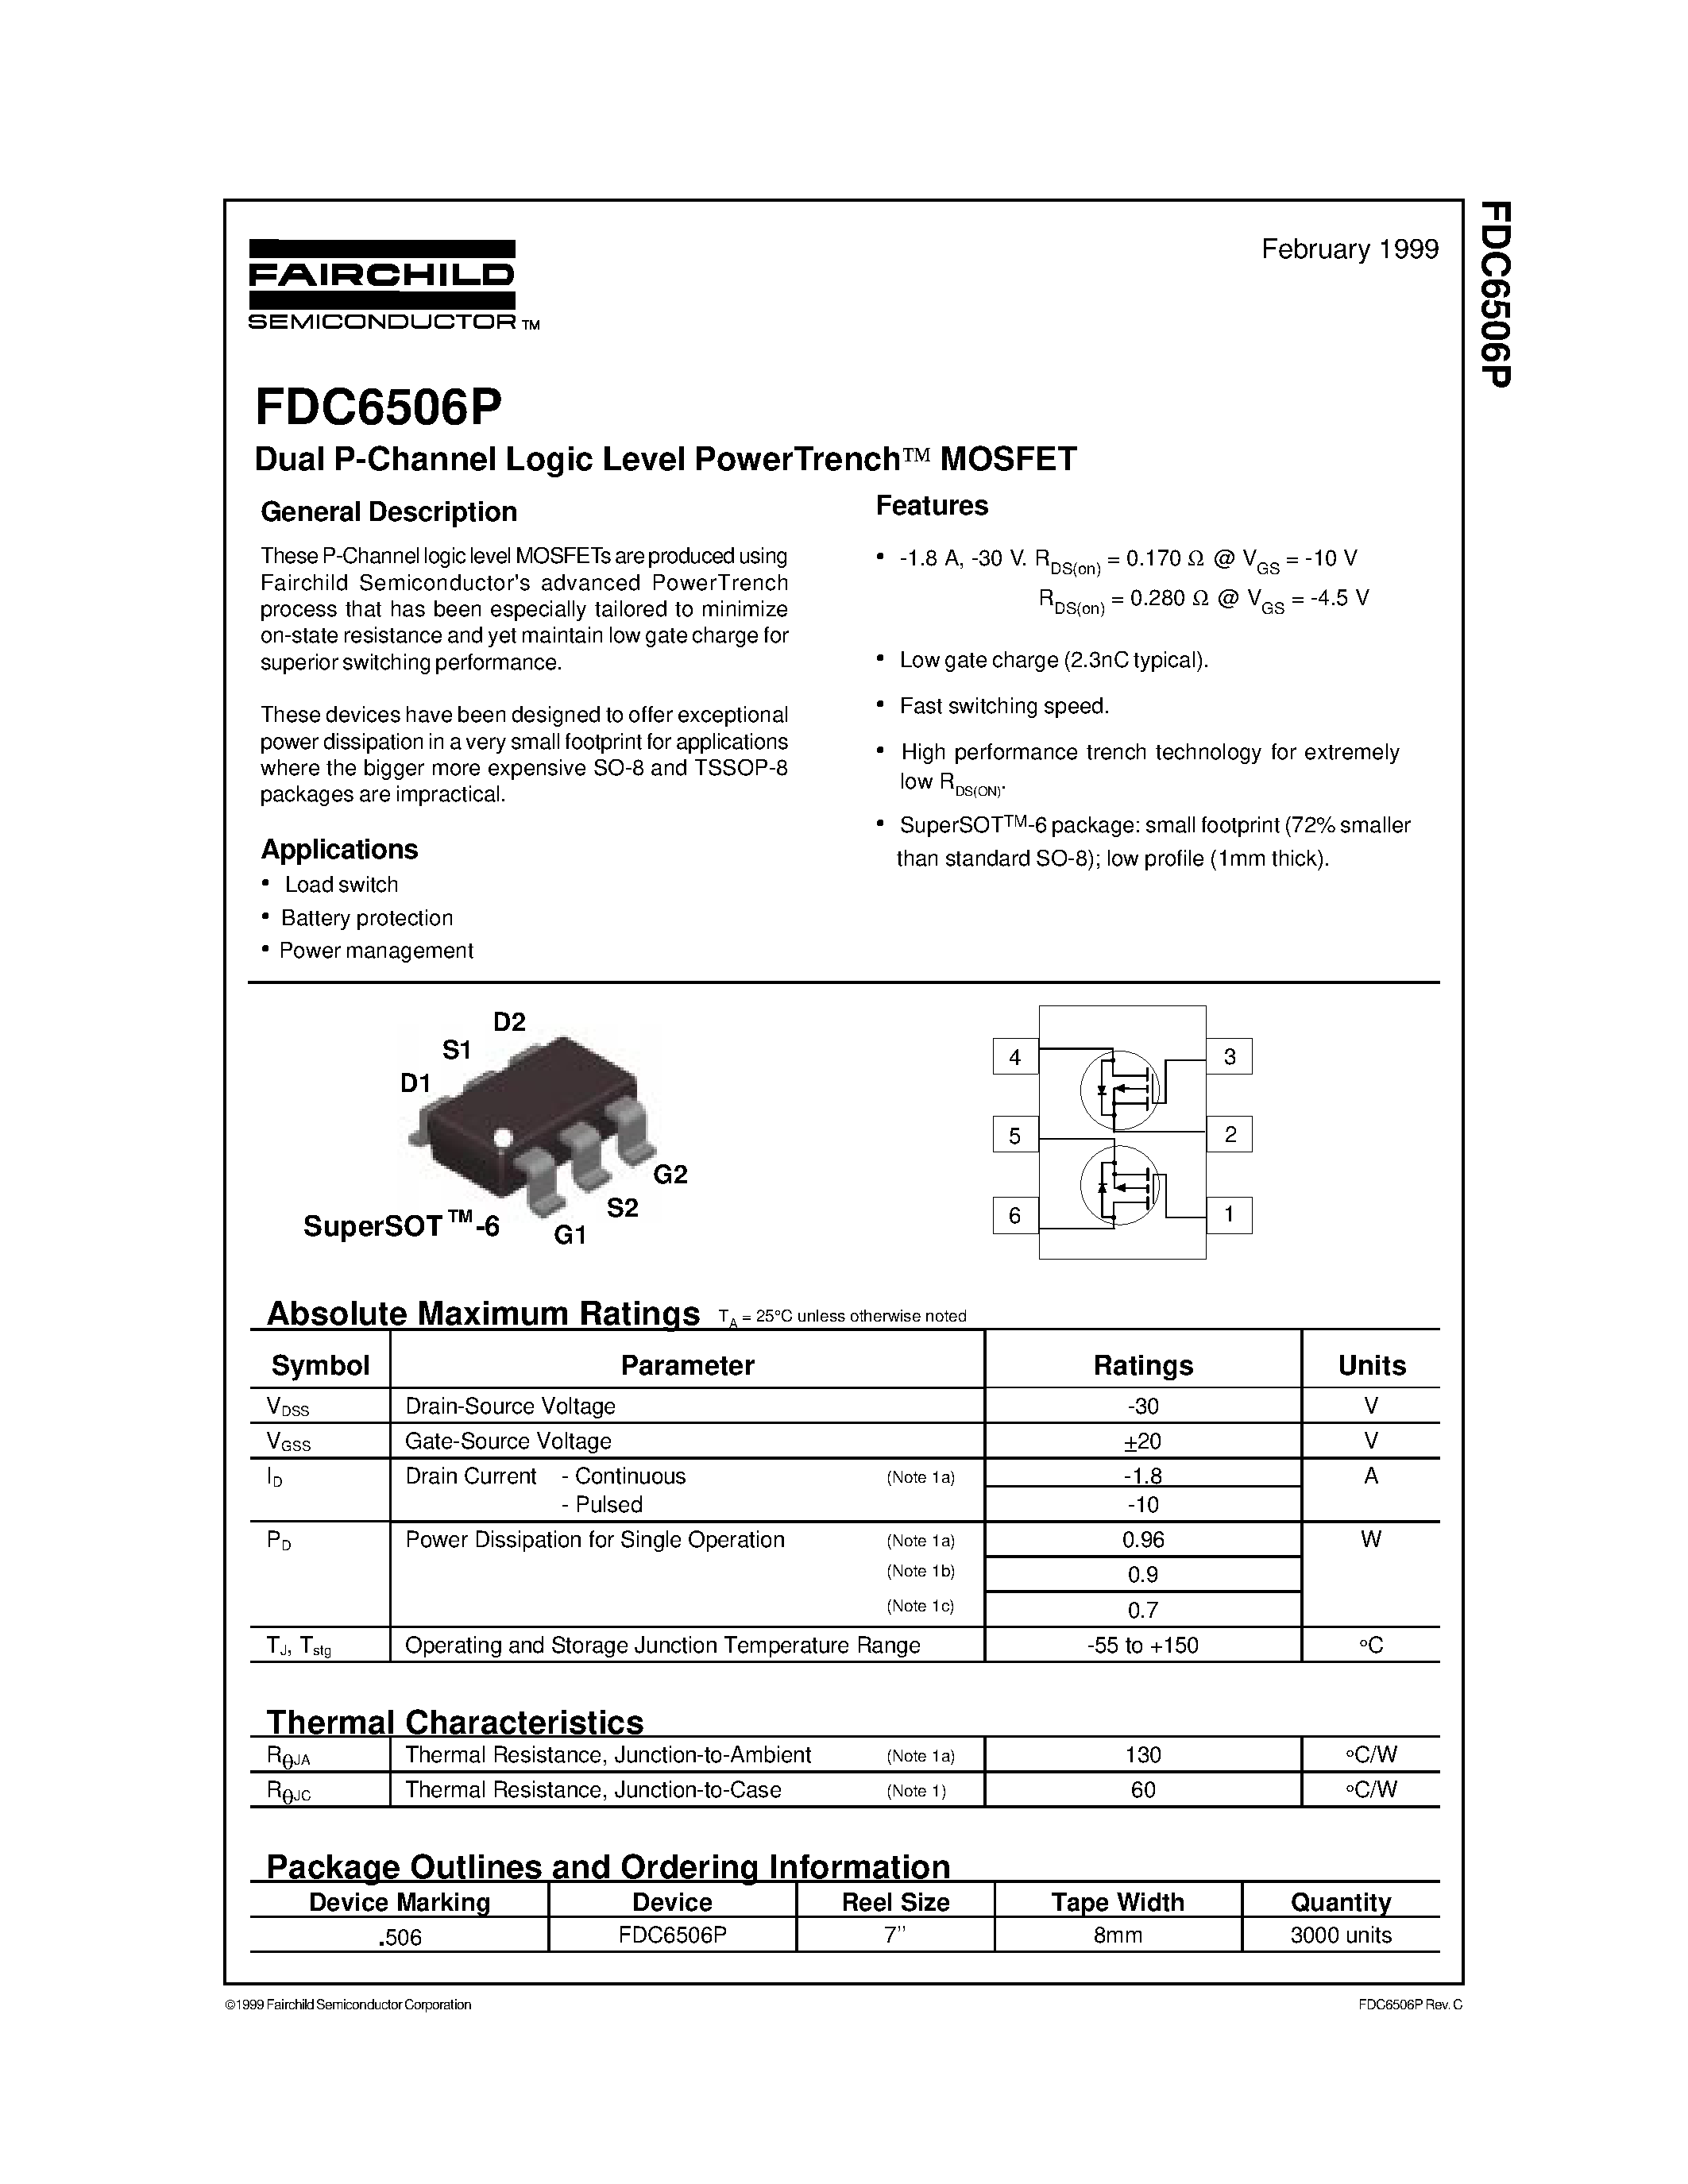 Datasheet FDC6506P - Dual P-Channel Logic Level PowerTrench MOSFET page 1